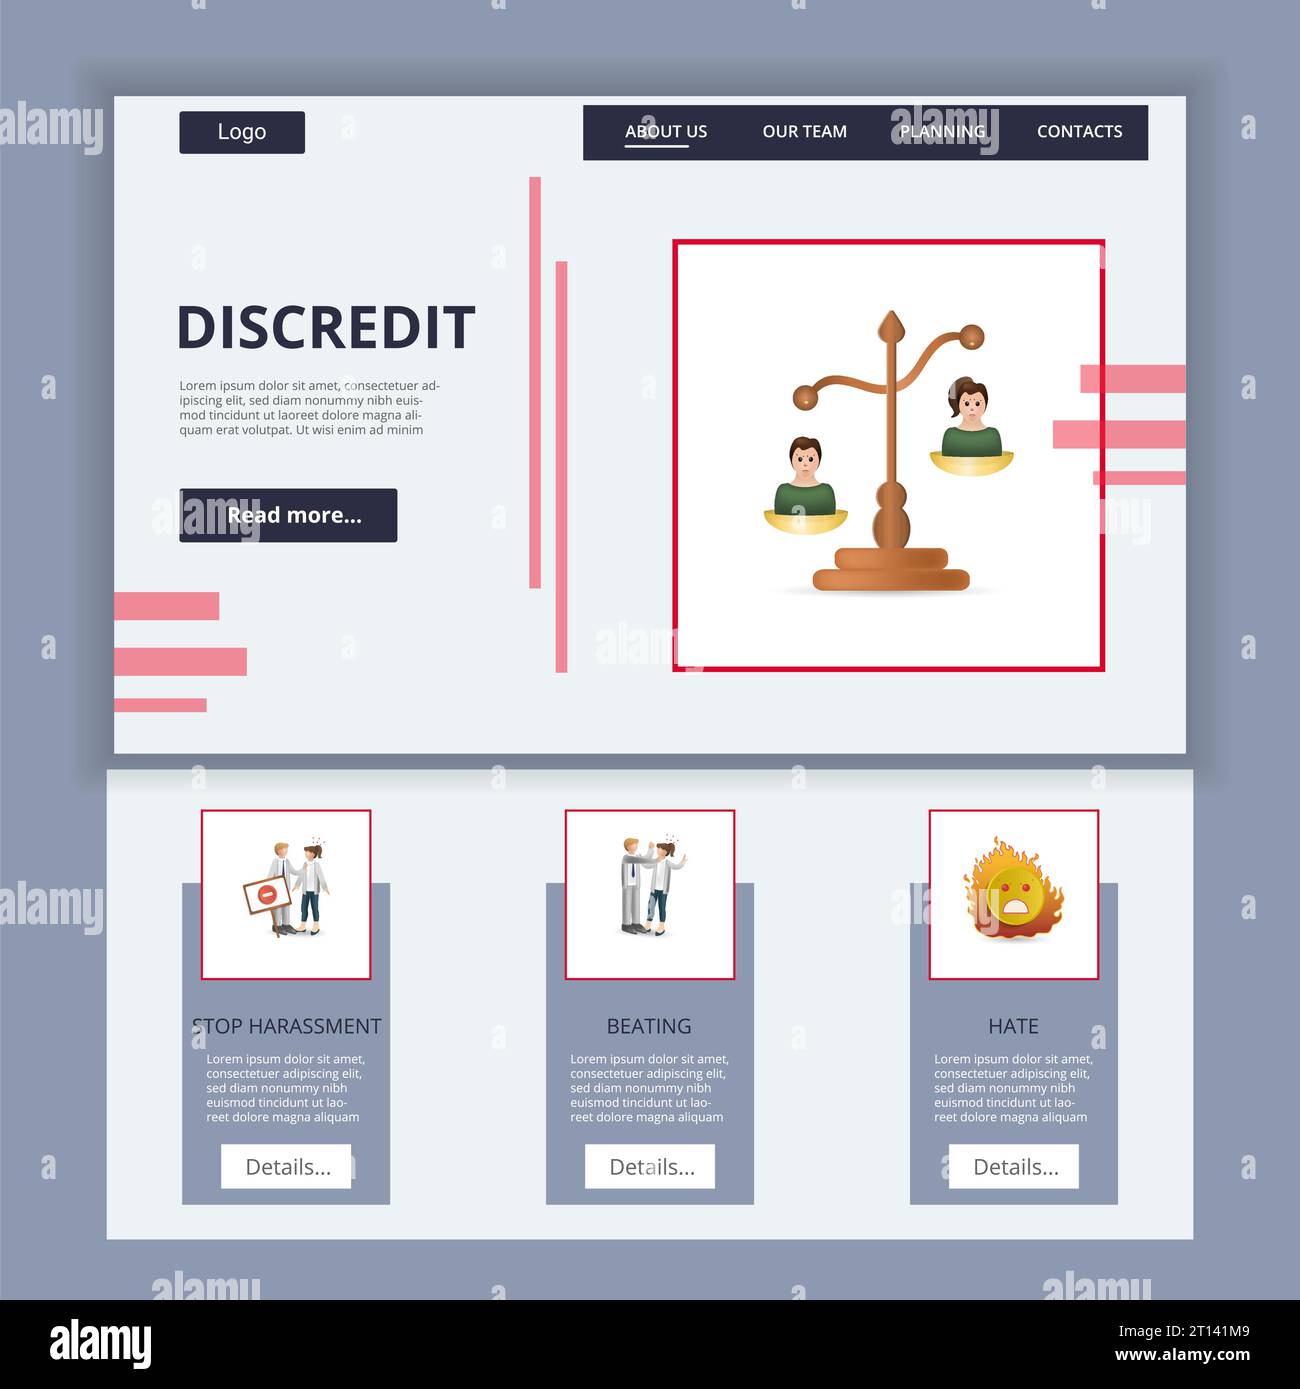 Discredit flat landing page website template. Stop harassment, beating, hate. Web banner with header, content and footer. Vector illustration. Stock Vector